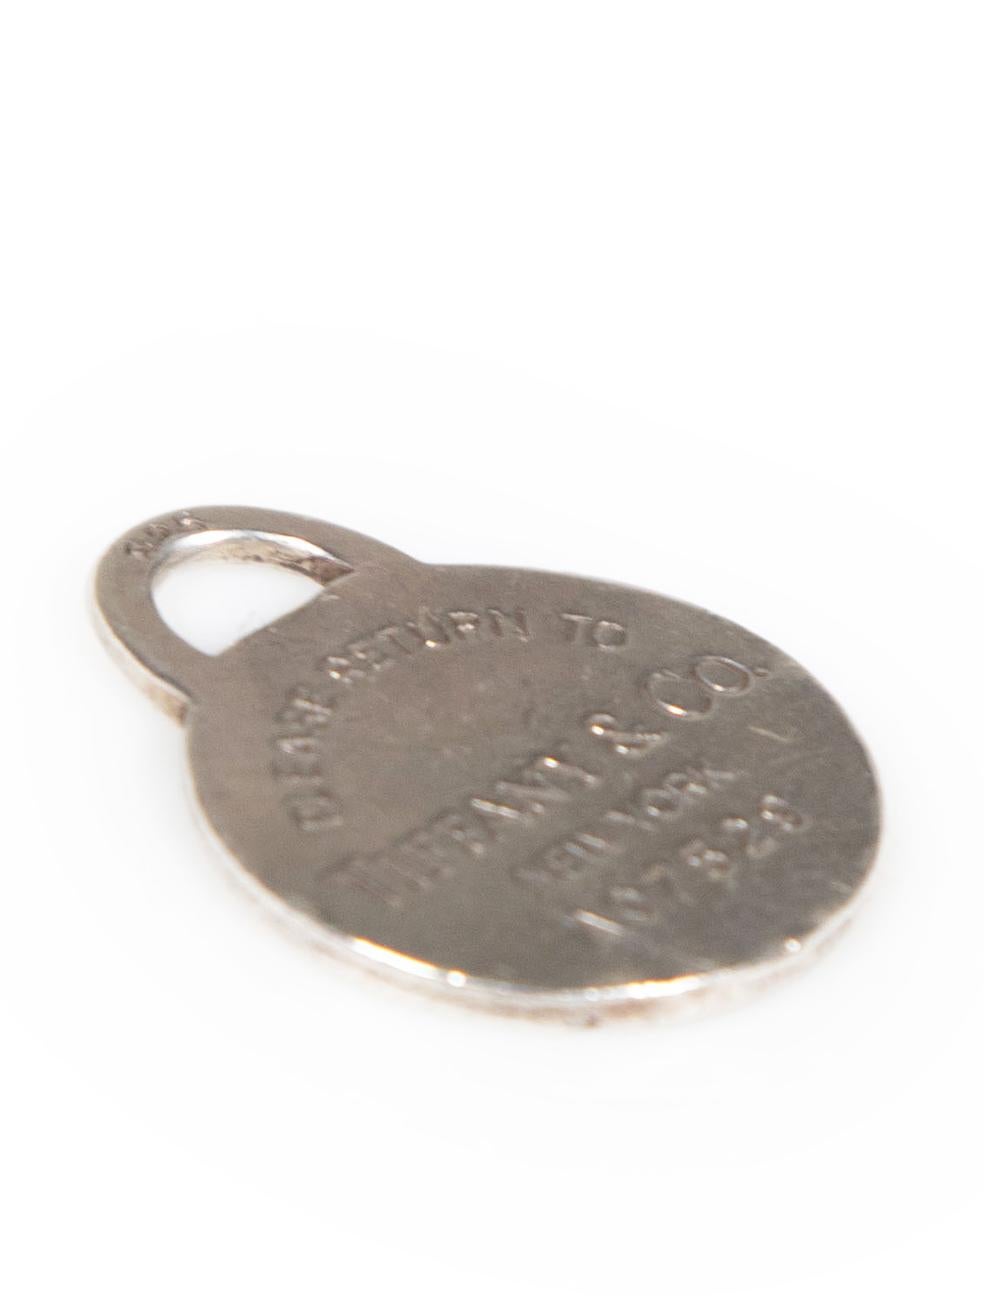 CONDITION is Good. General wear to charm is evident. Moderate signs of wear to both sides with scratches to the surface on this used Tiffany & Co. designer resale item.
 
Details
Silver
925 Sterling silver
Charm
Return to Tiffany embossed
